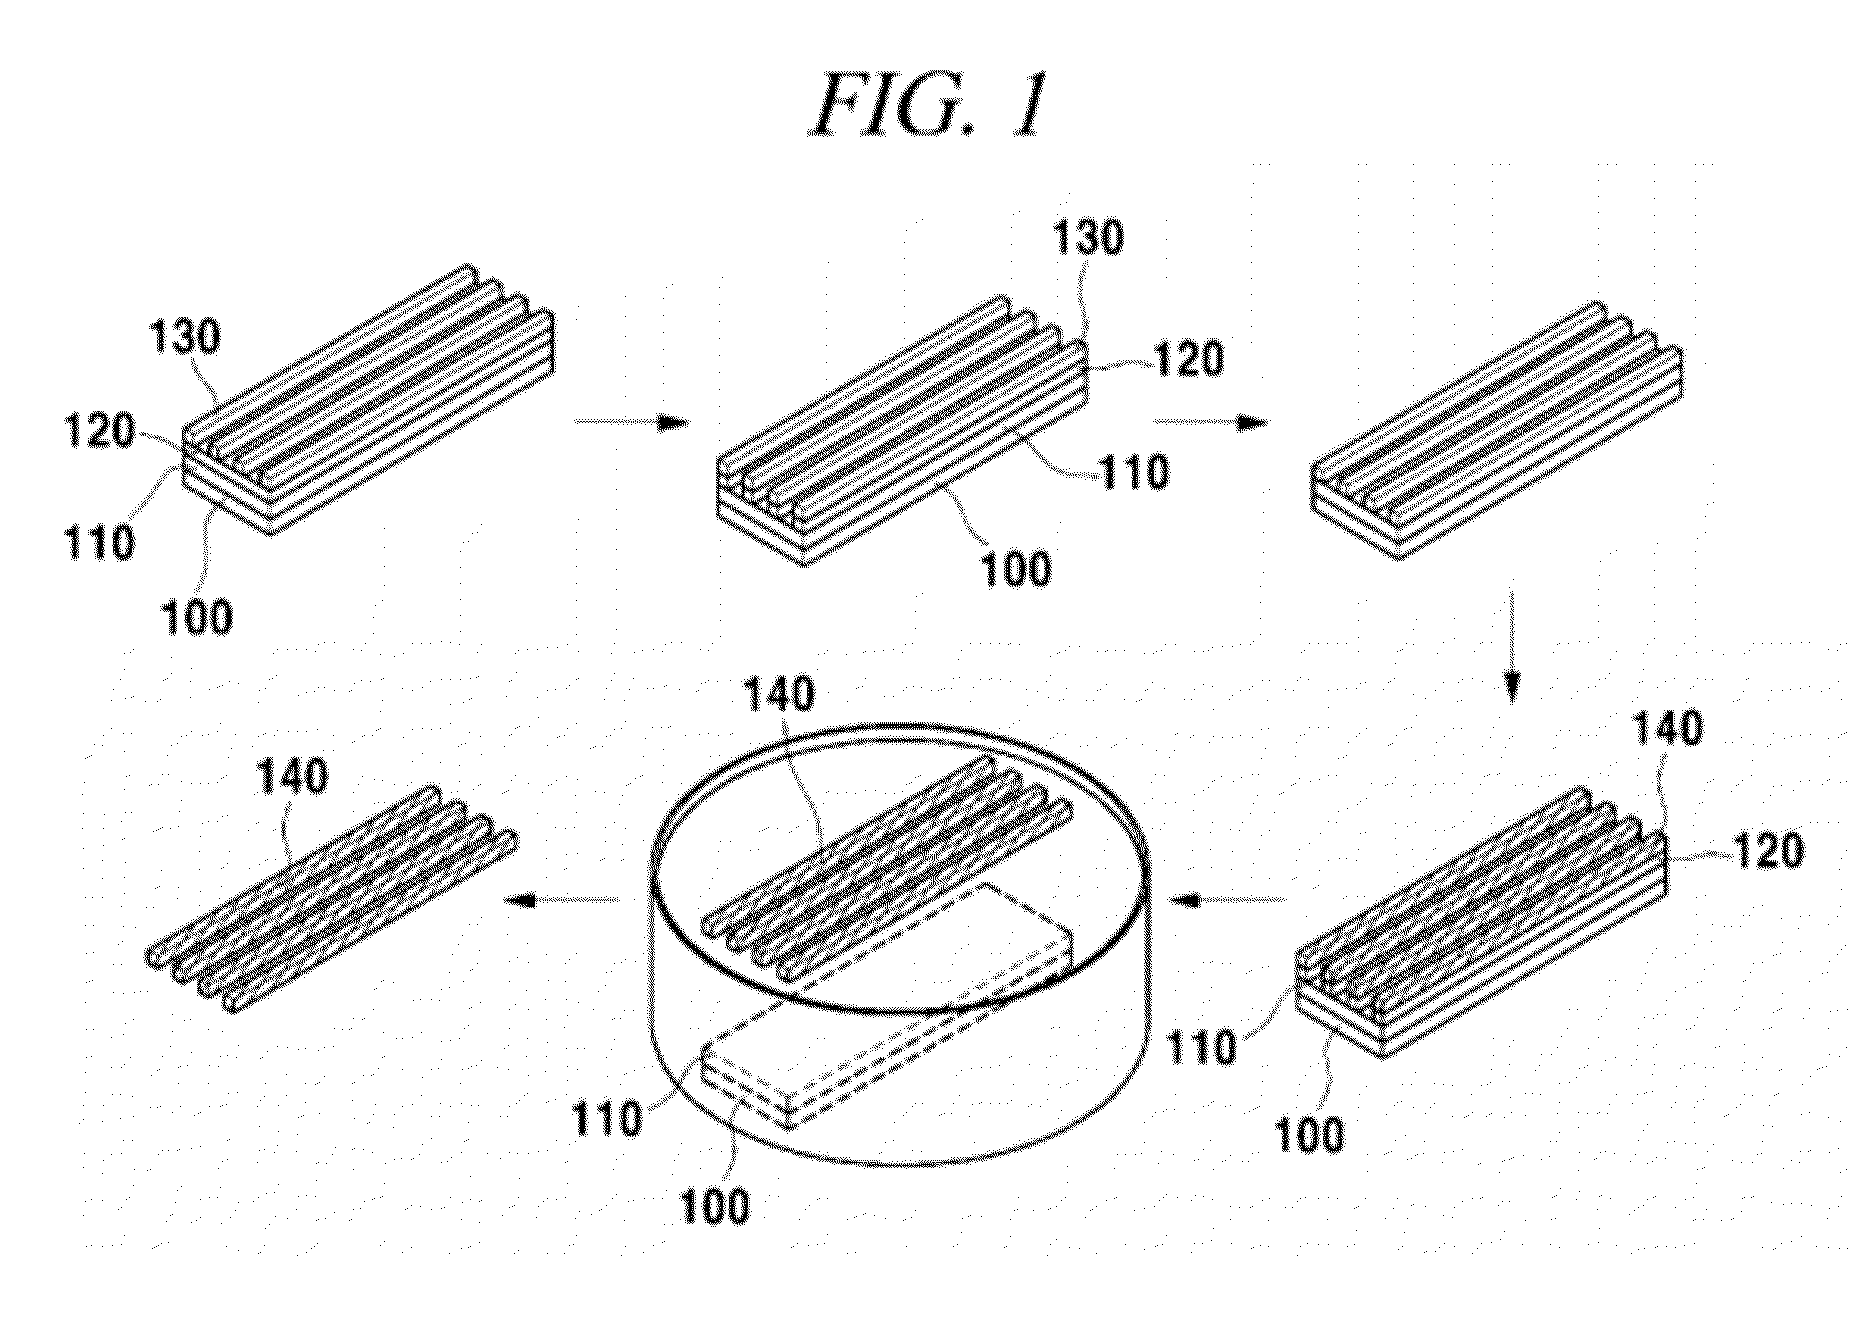 Graphene fiber, method for manufacturing same and use thereof